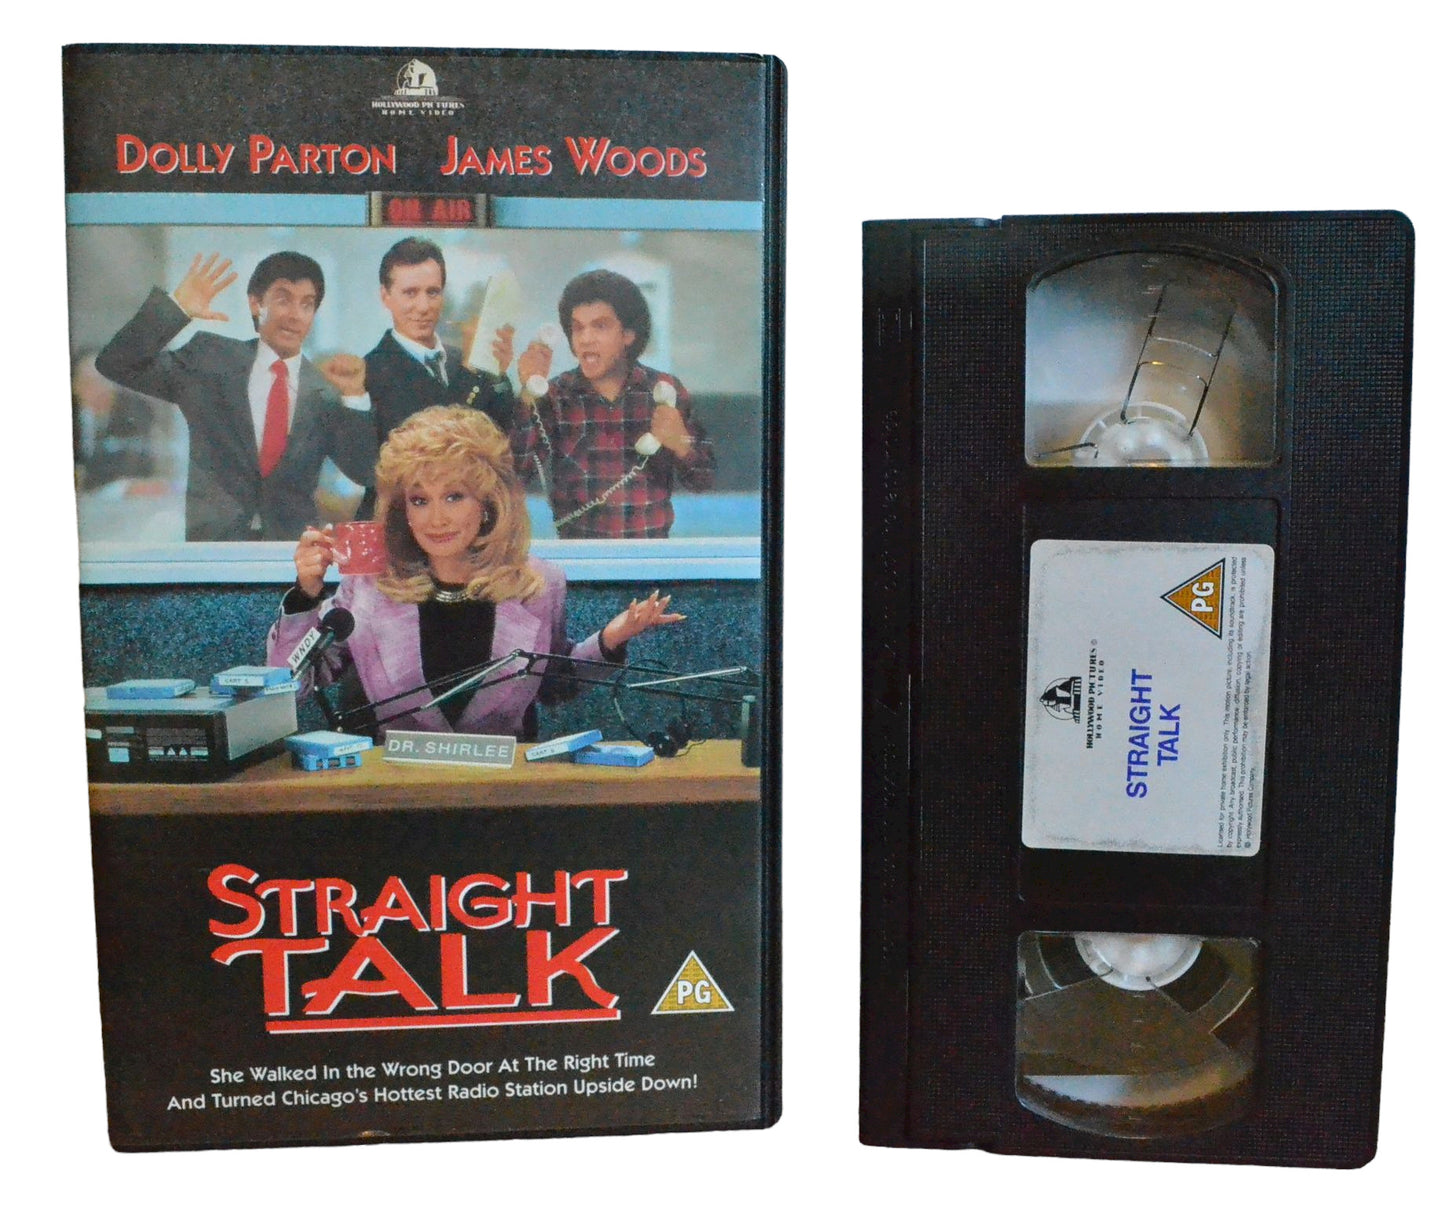 Straight Talk ("Dreams Do Come True... Sometimes") - Dolly Parton - Hollywood Pictures Home Video - Drama - Large Box - Pal VHS-